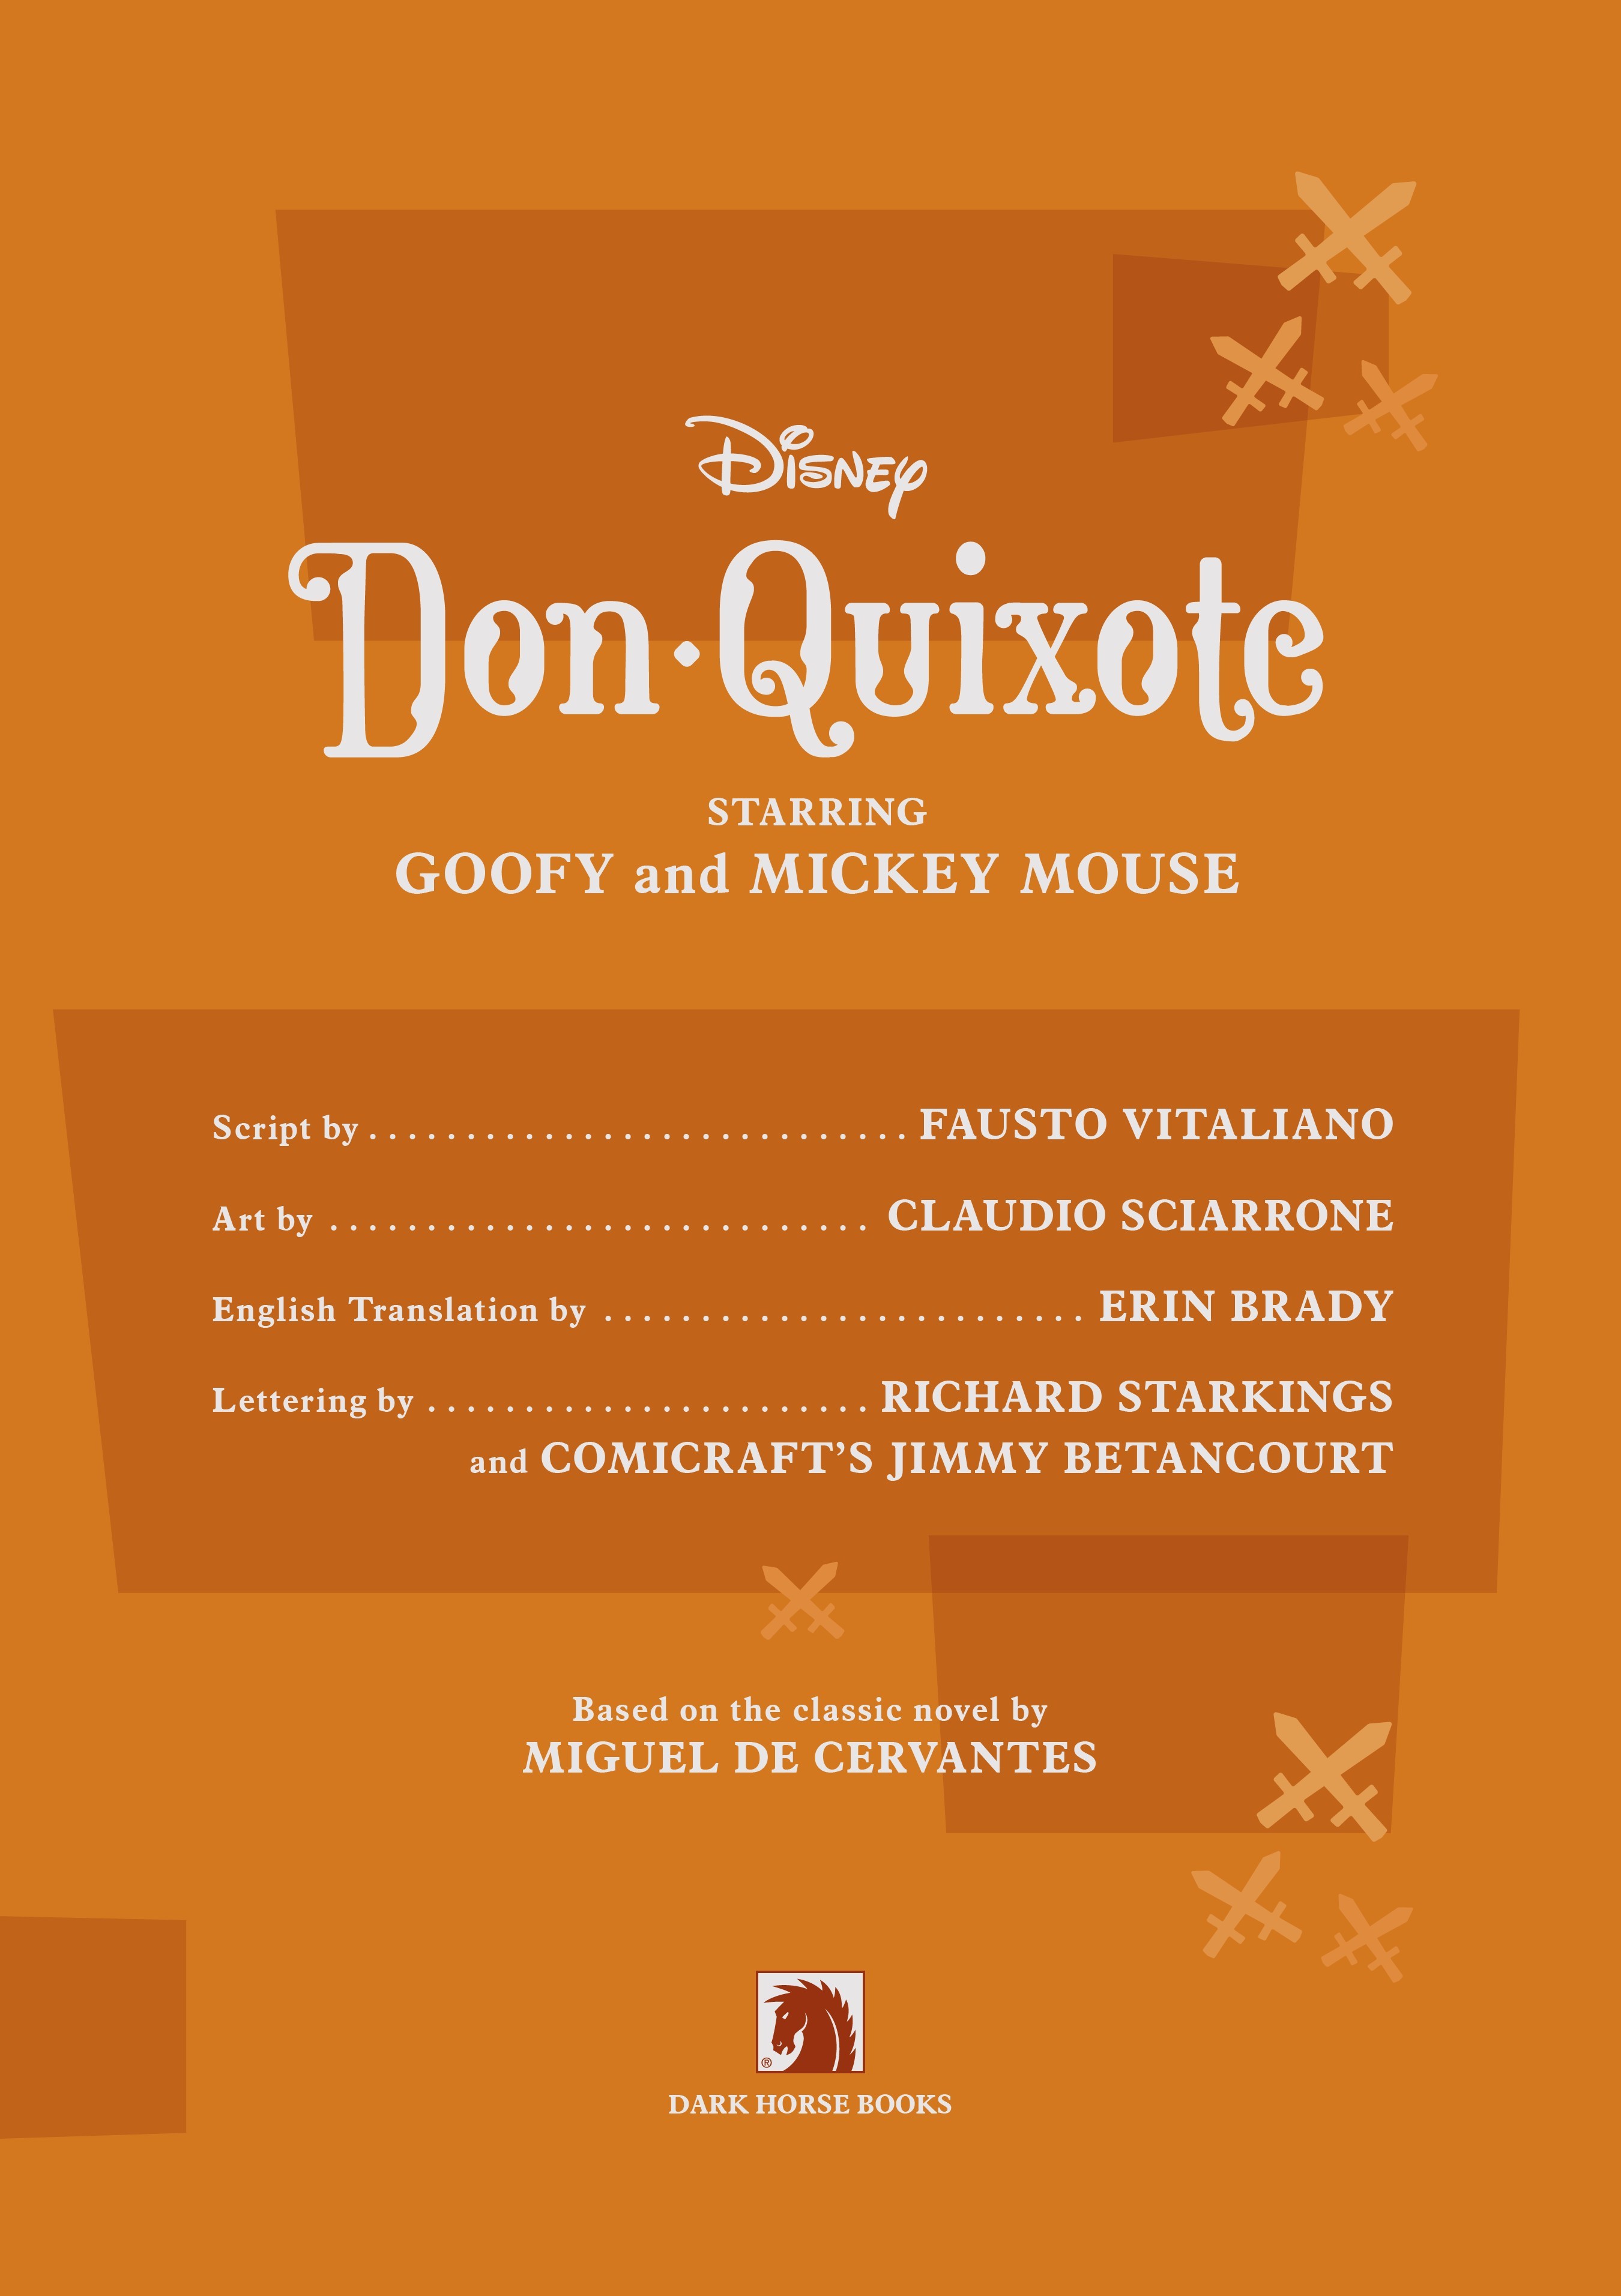 Read online Disney Don Quixote, Starring Goofy and Mickey Mouse comic -  Issue # TPB - 4